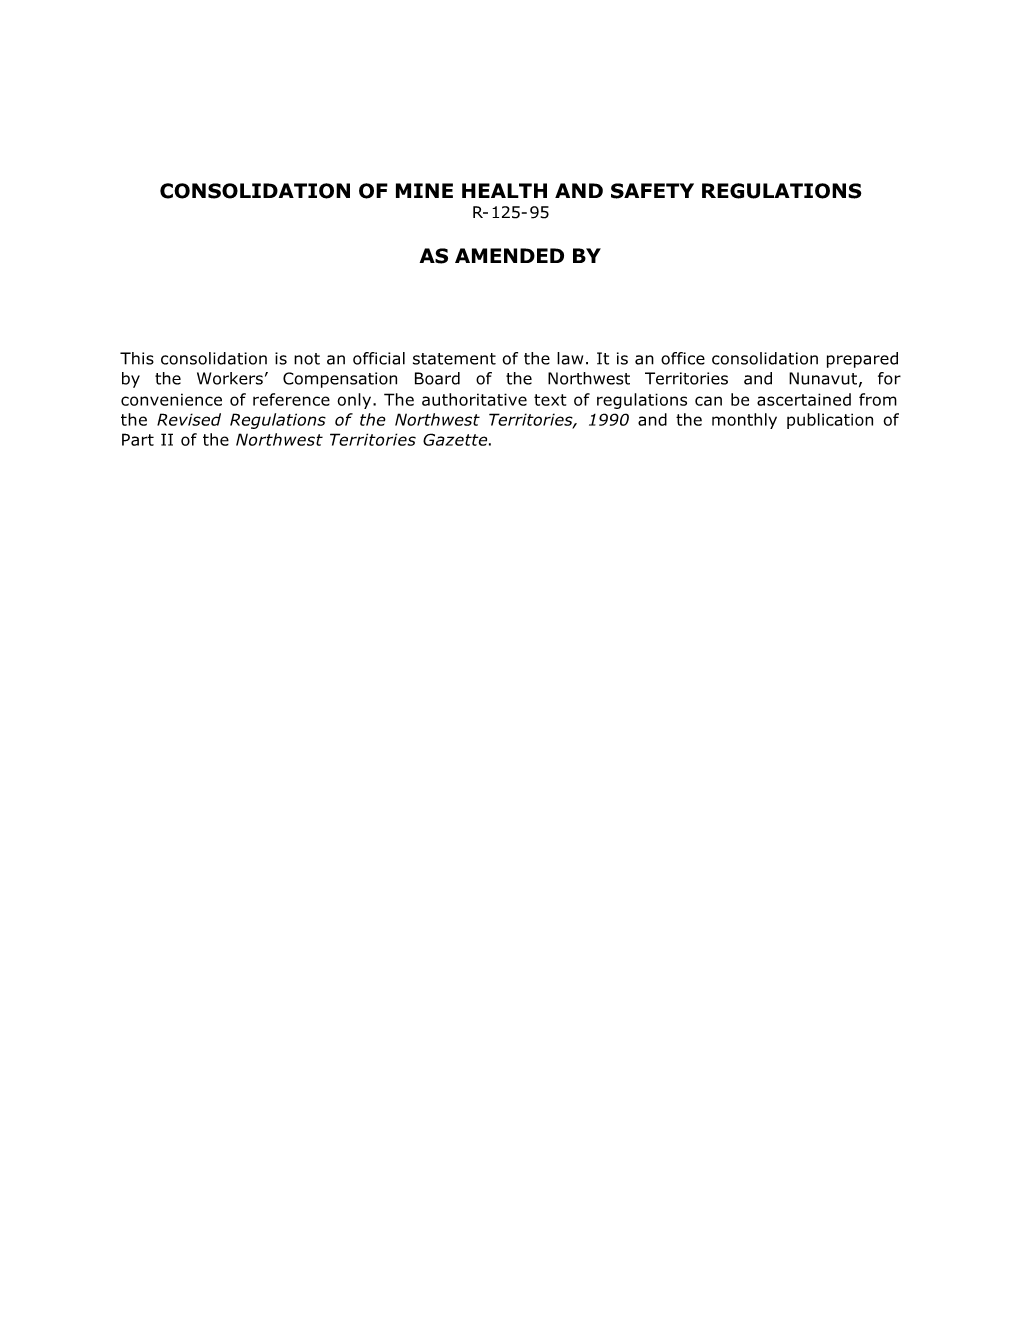 Consolidation of Mine Health and Safety Regulations As